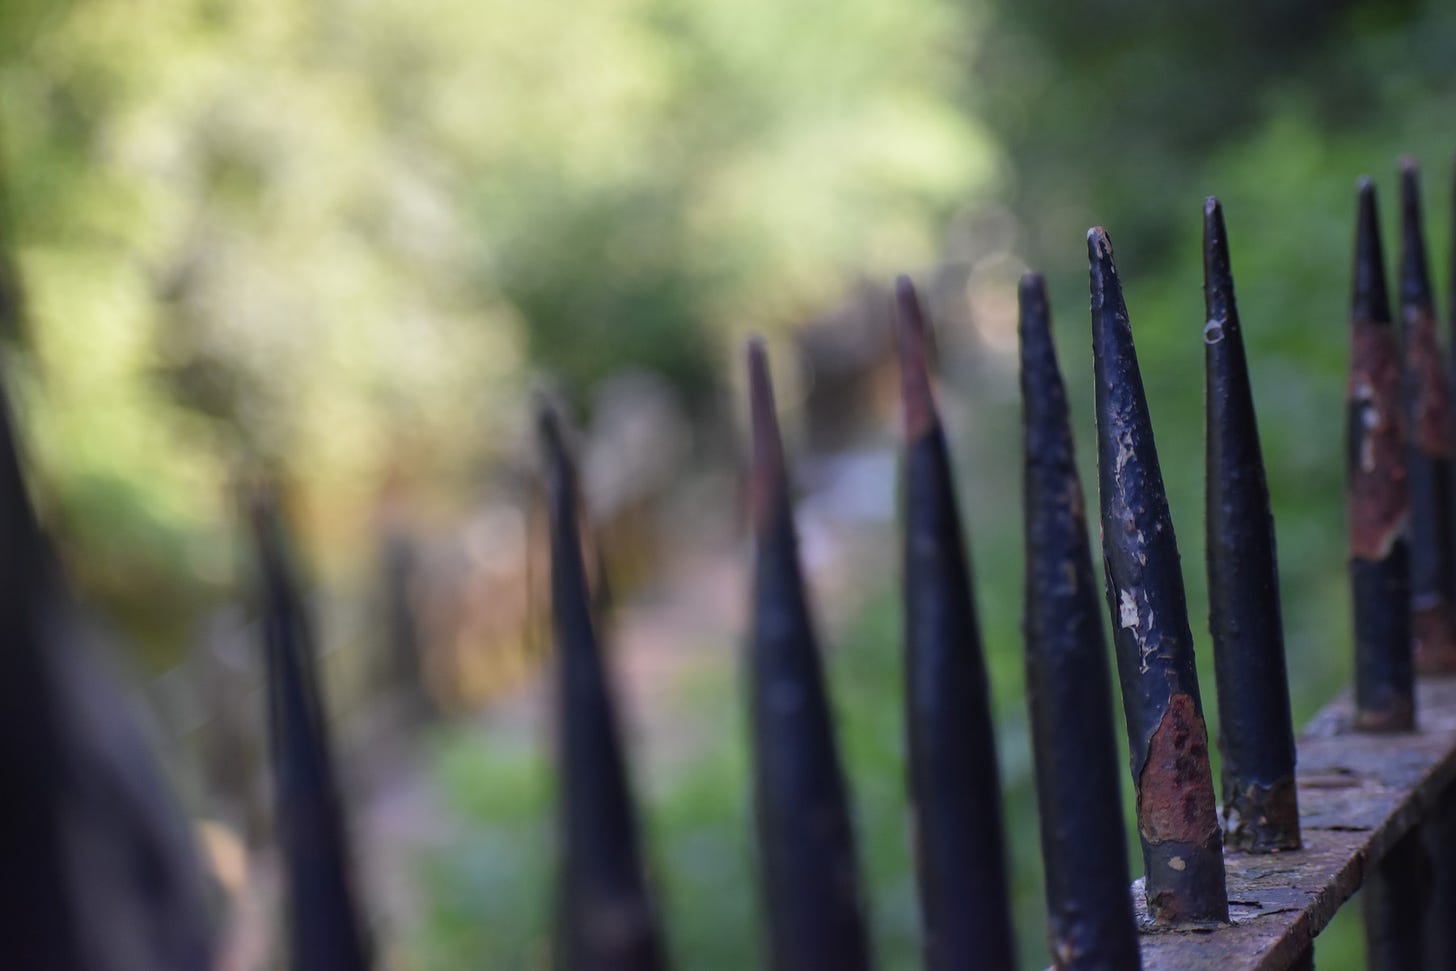 A row of pointy metal fence posts.